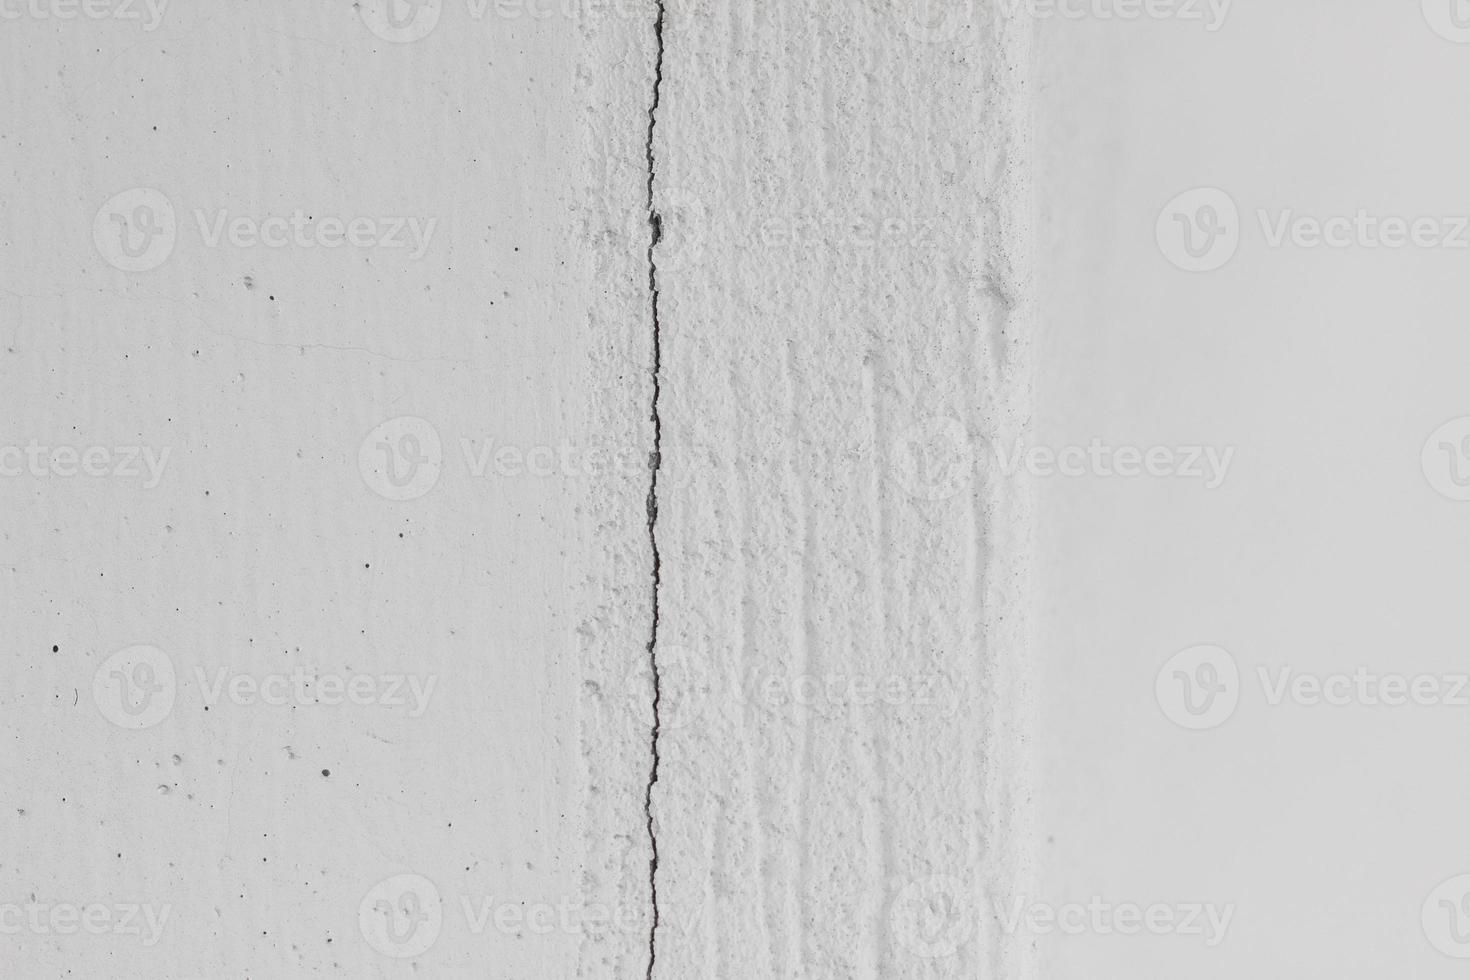 White textured concrete wall with dots and vertical crack, horizontal photo. Shot for abstract background, decorative design element with empty space, wallpaper photo